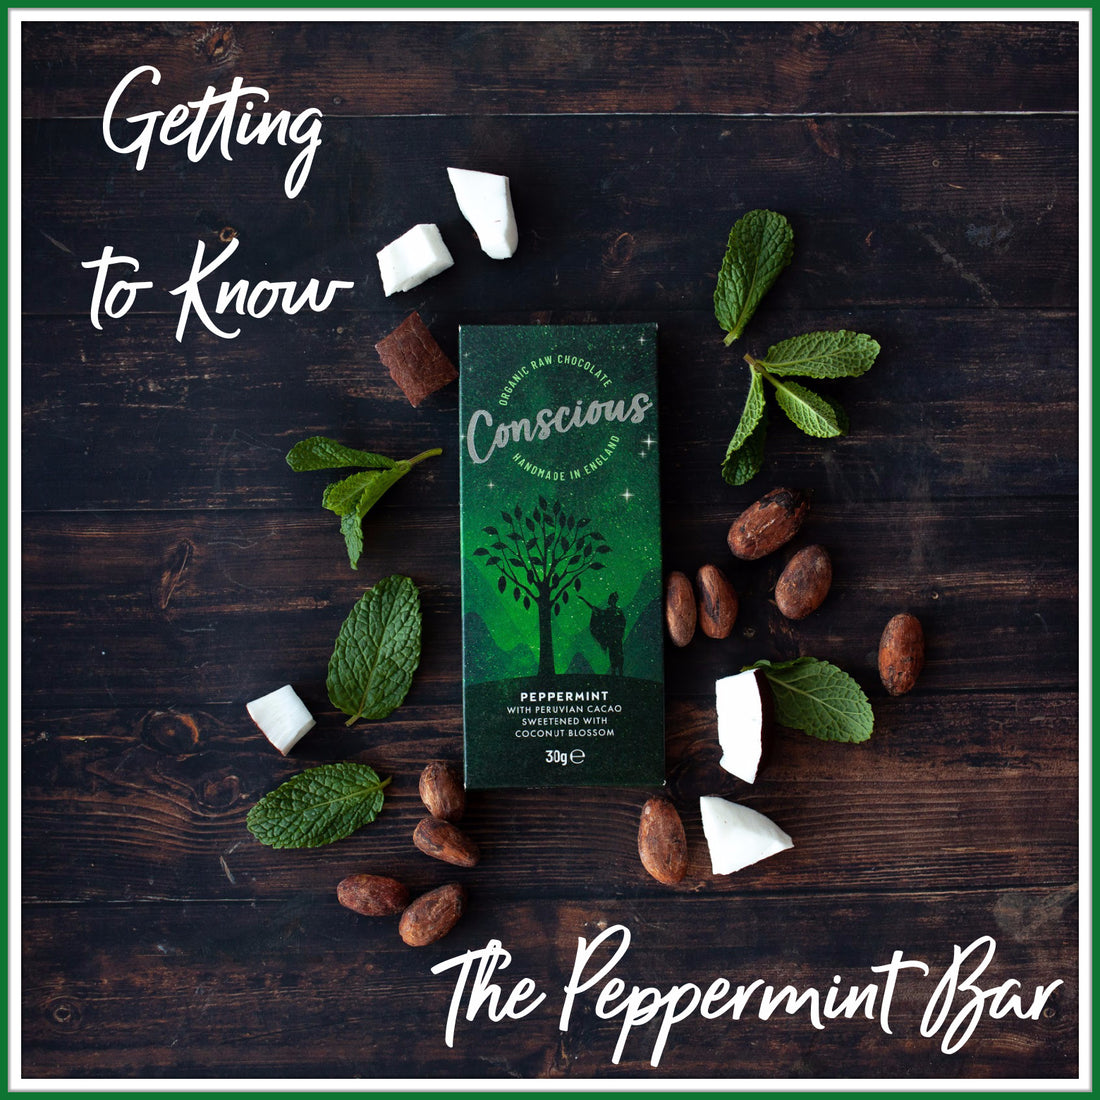 Getting to Know the Peppermint Bar